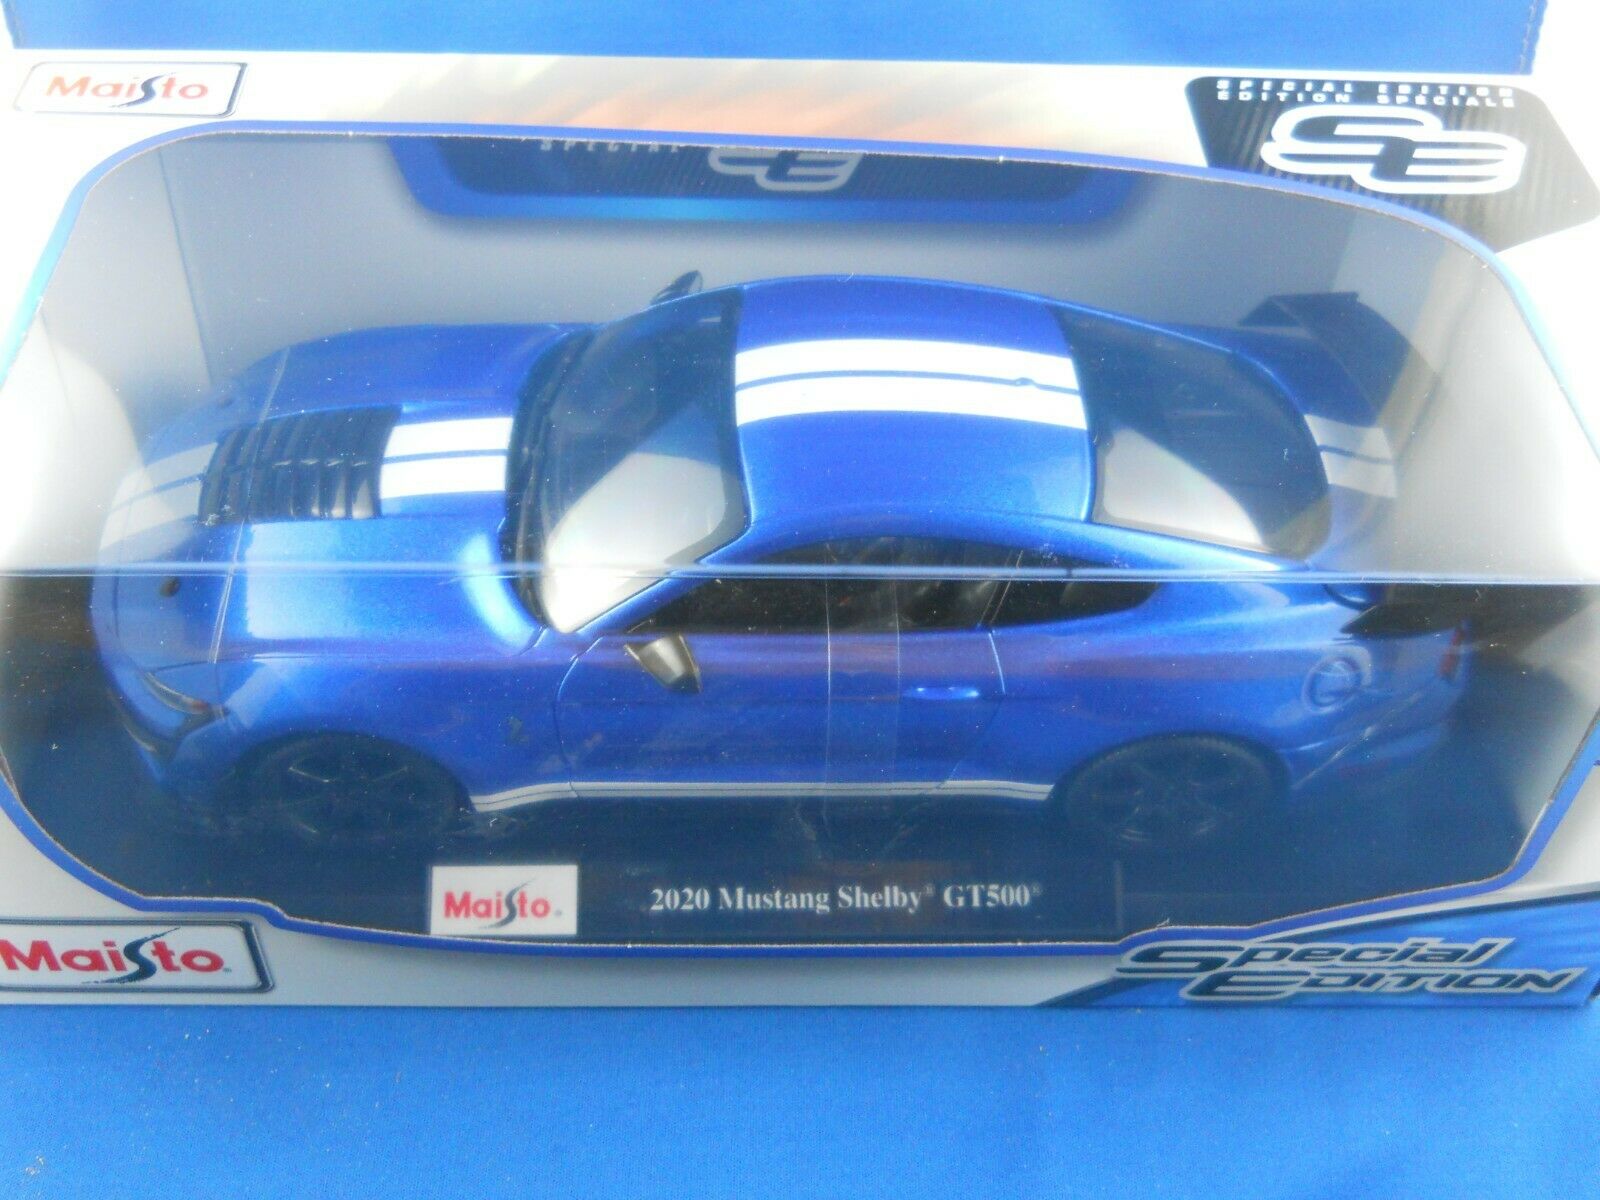 MAISTO 1/18 - F-ORD Shelby GT500 Mustang - 2020